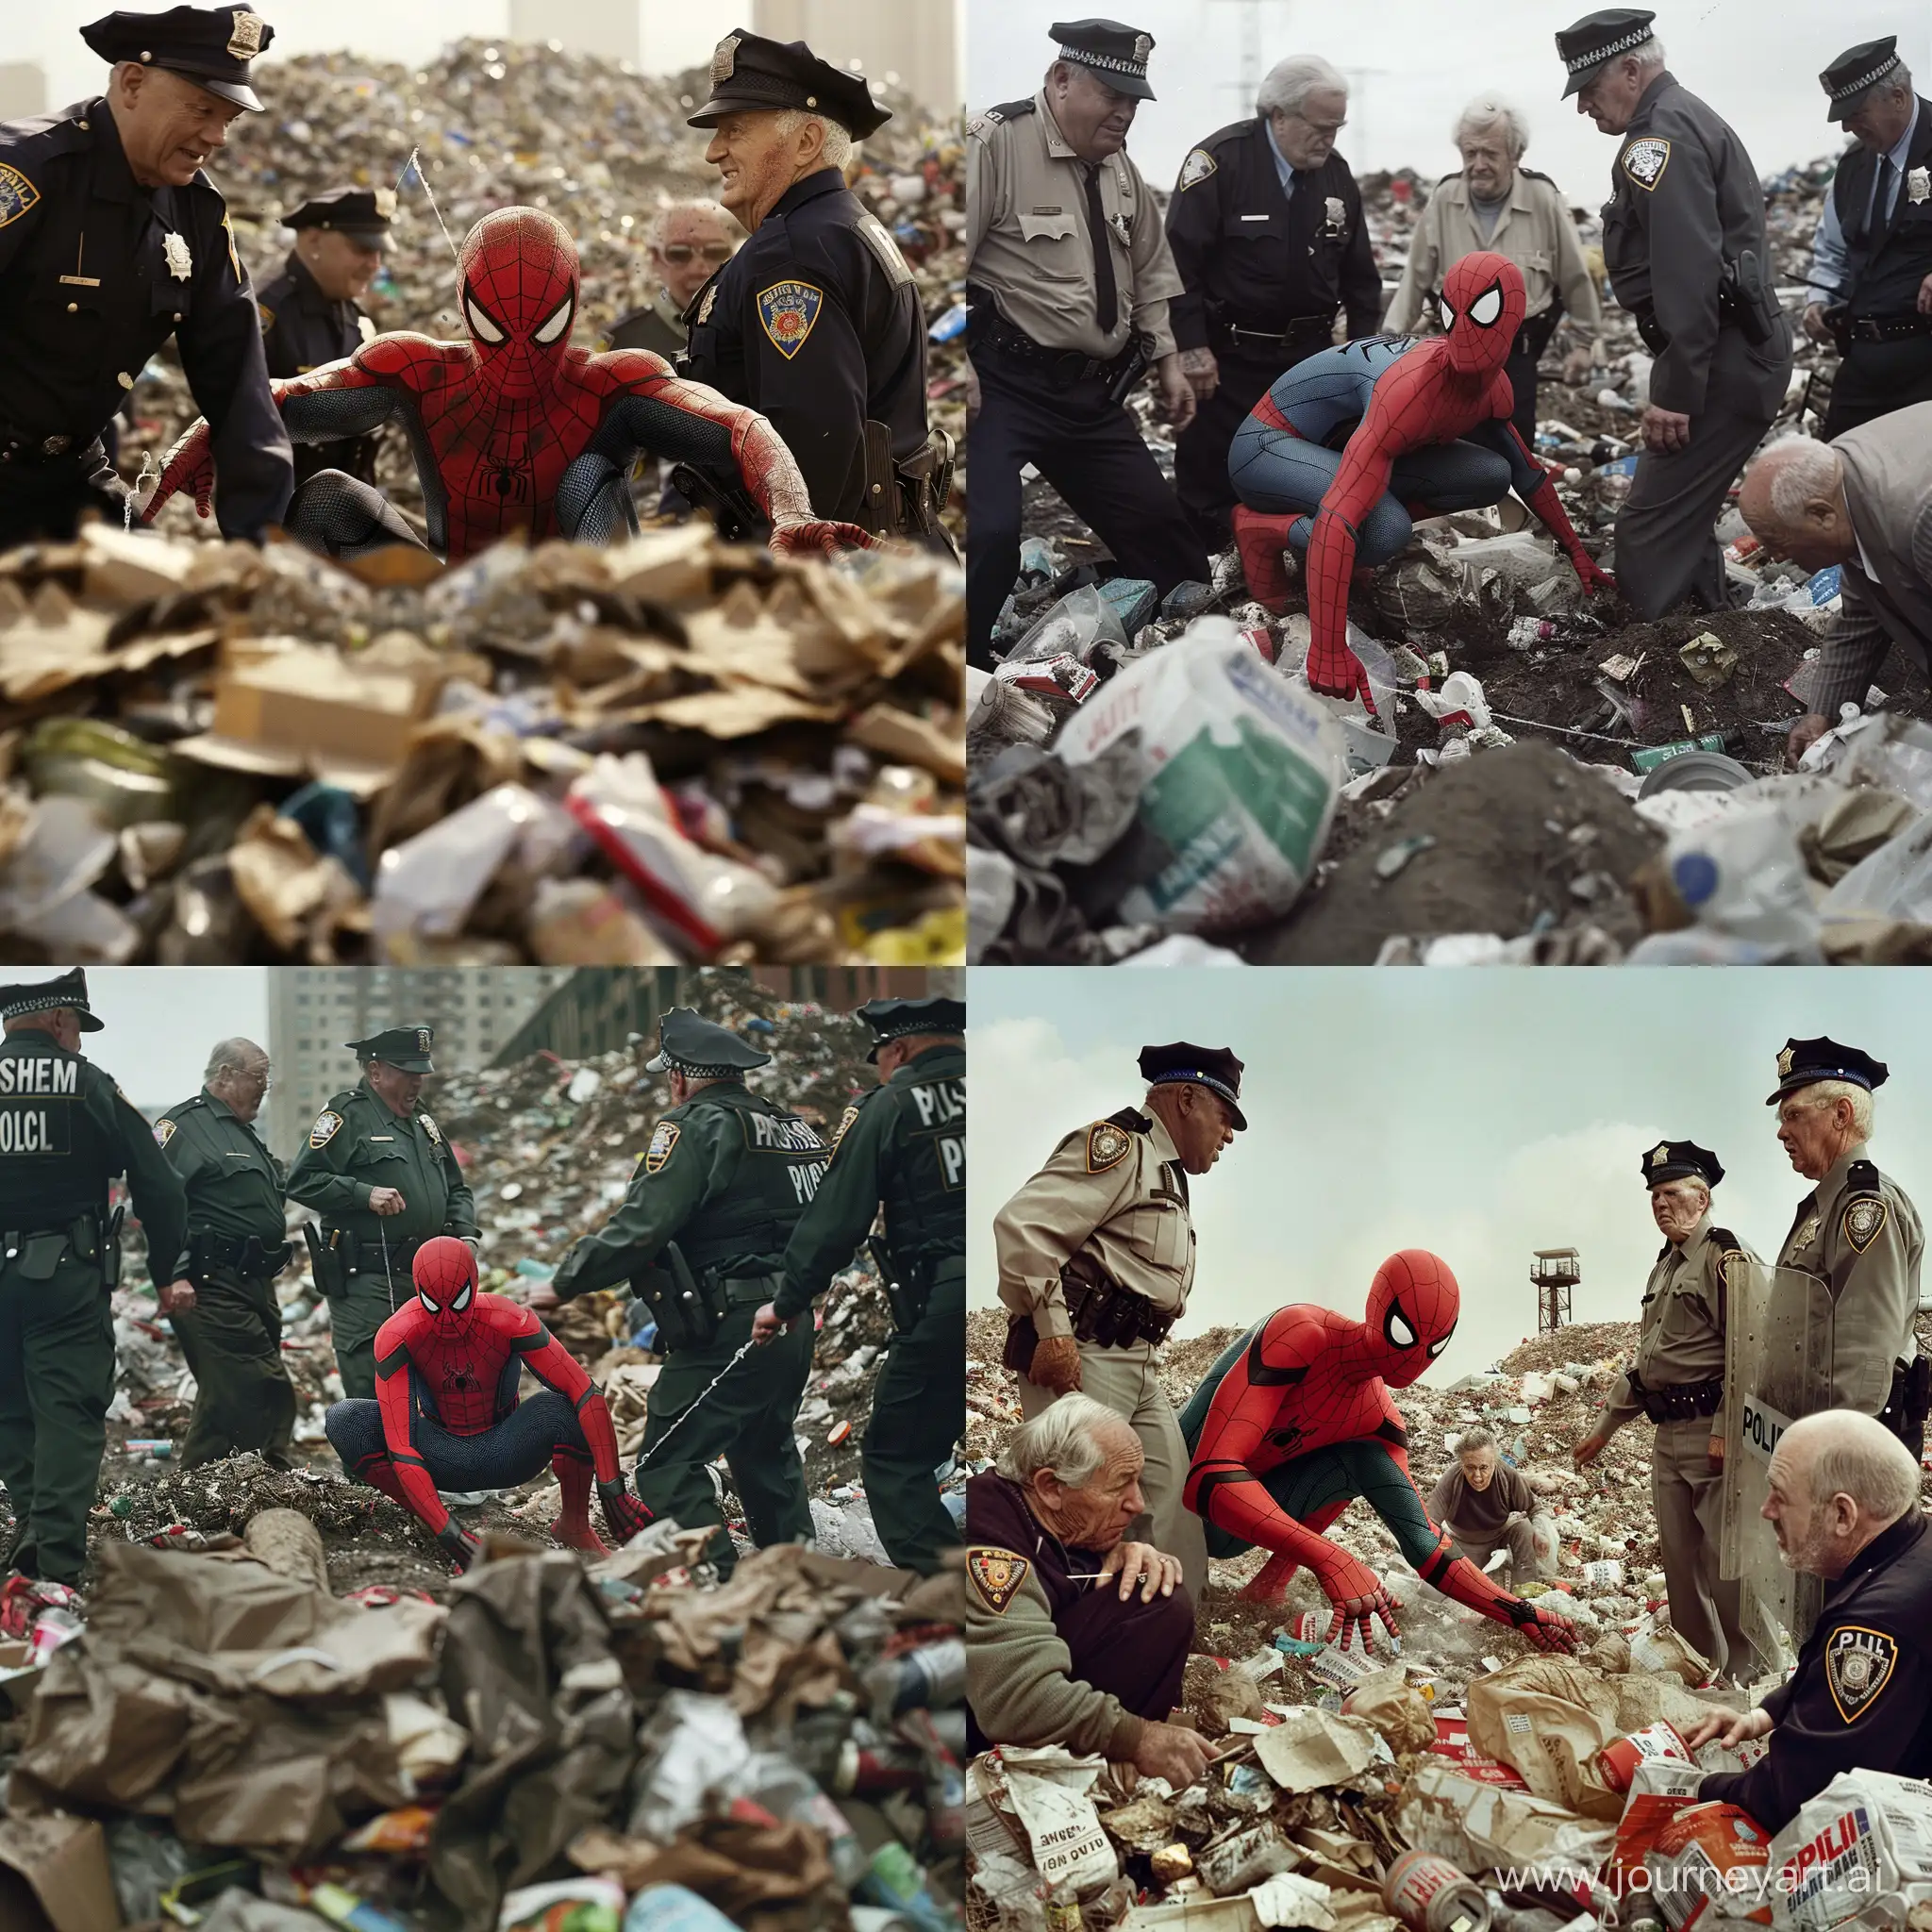 Spiderman being dragged through garbage at a landfill by elderly policemen